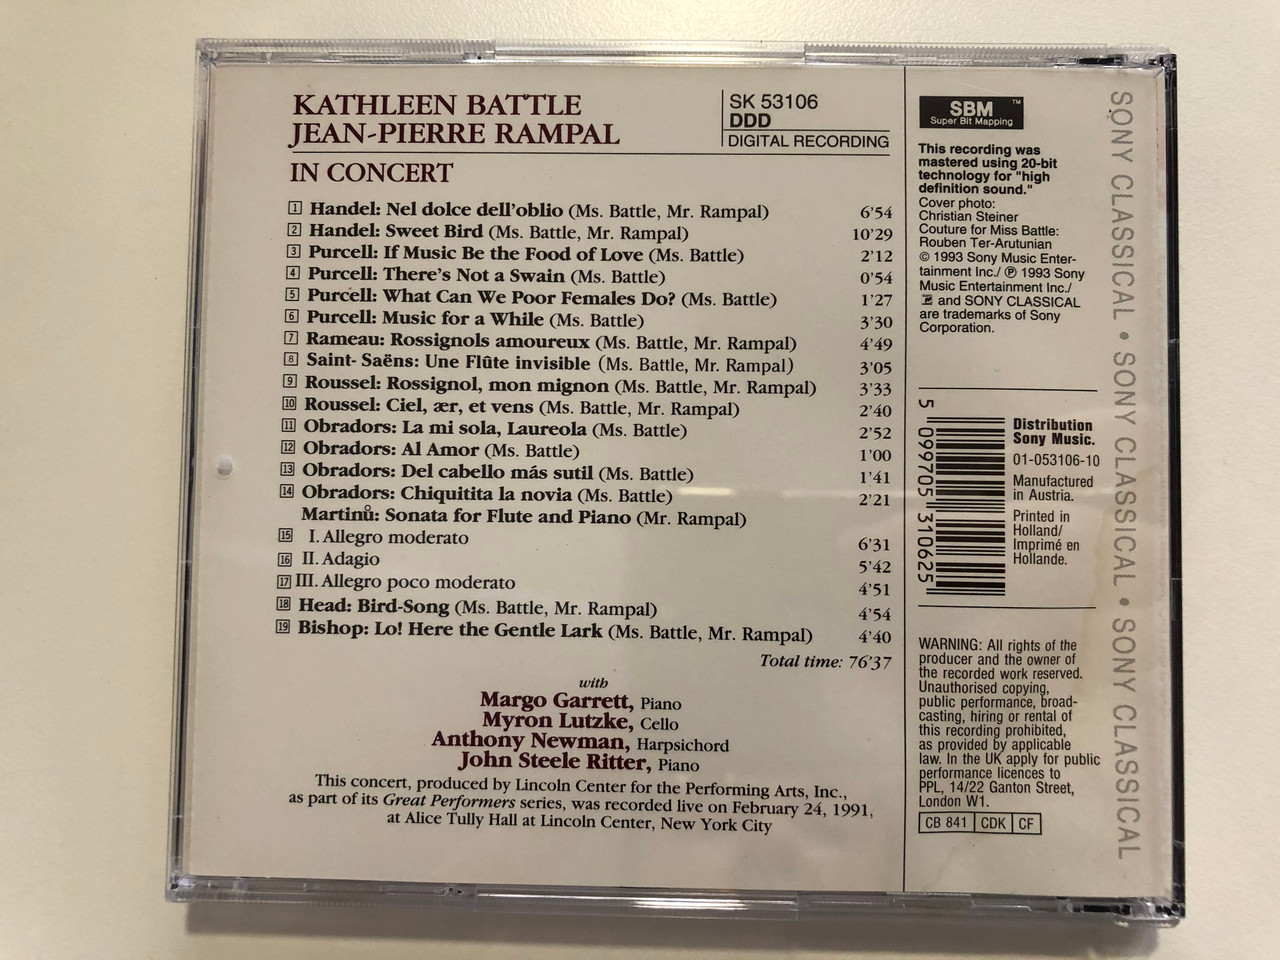 https://cdn10.bigcommerce.com/s-62bdpkt7pb/products/31238/images/183888/Kathleen_Battle_Jean-Pierre_Rampal_In_Concert_Sony_Classical_Audio_CD_1993_SK_53106_3__31219.1625747446.1280.1280.JPG?c=2